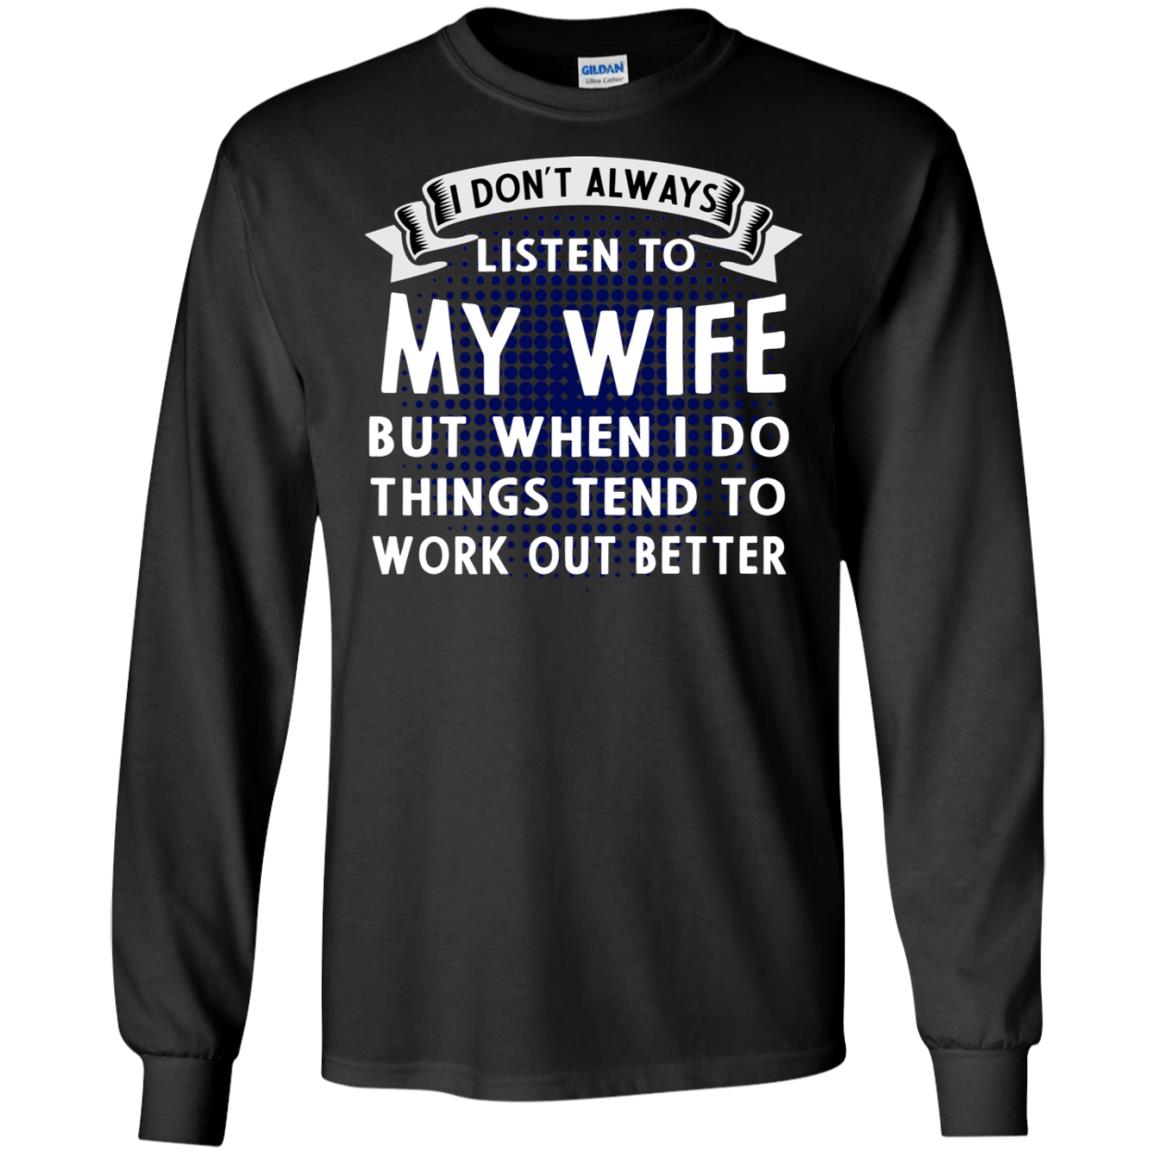 I Don't Always Listen To My Wife But When I Do Things Tend To Work Out Better Shirt For HusbandG240 Gildan LS Ultra Cotton T-Shirt